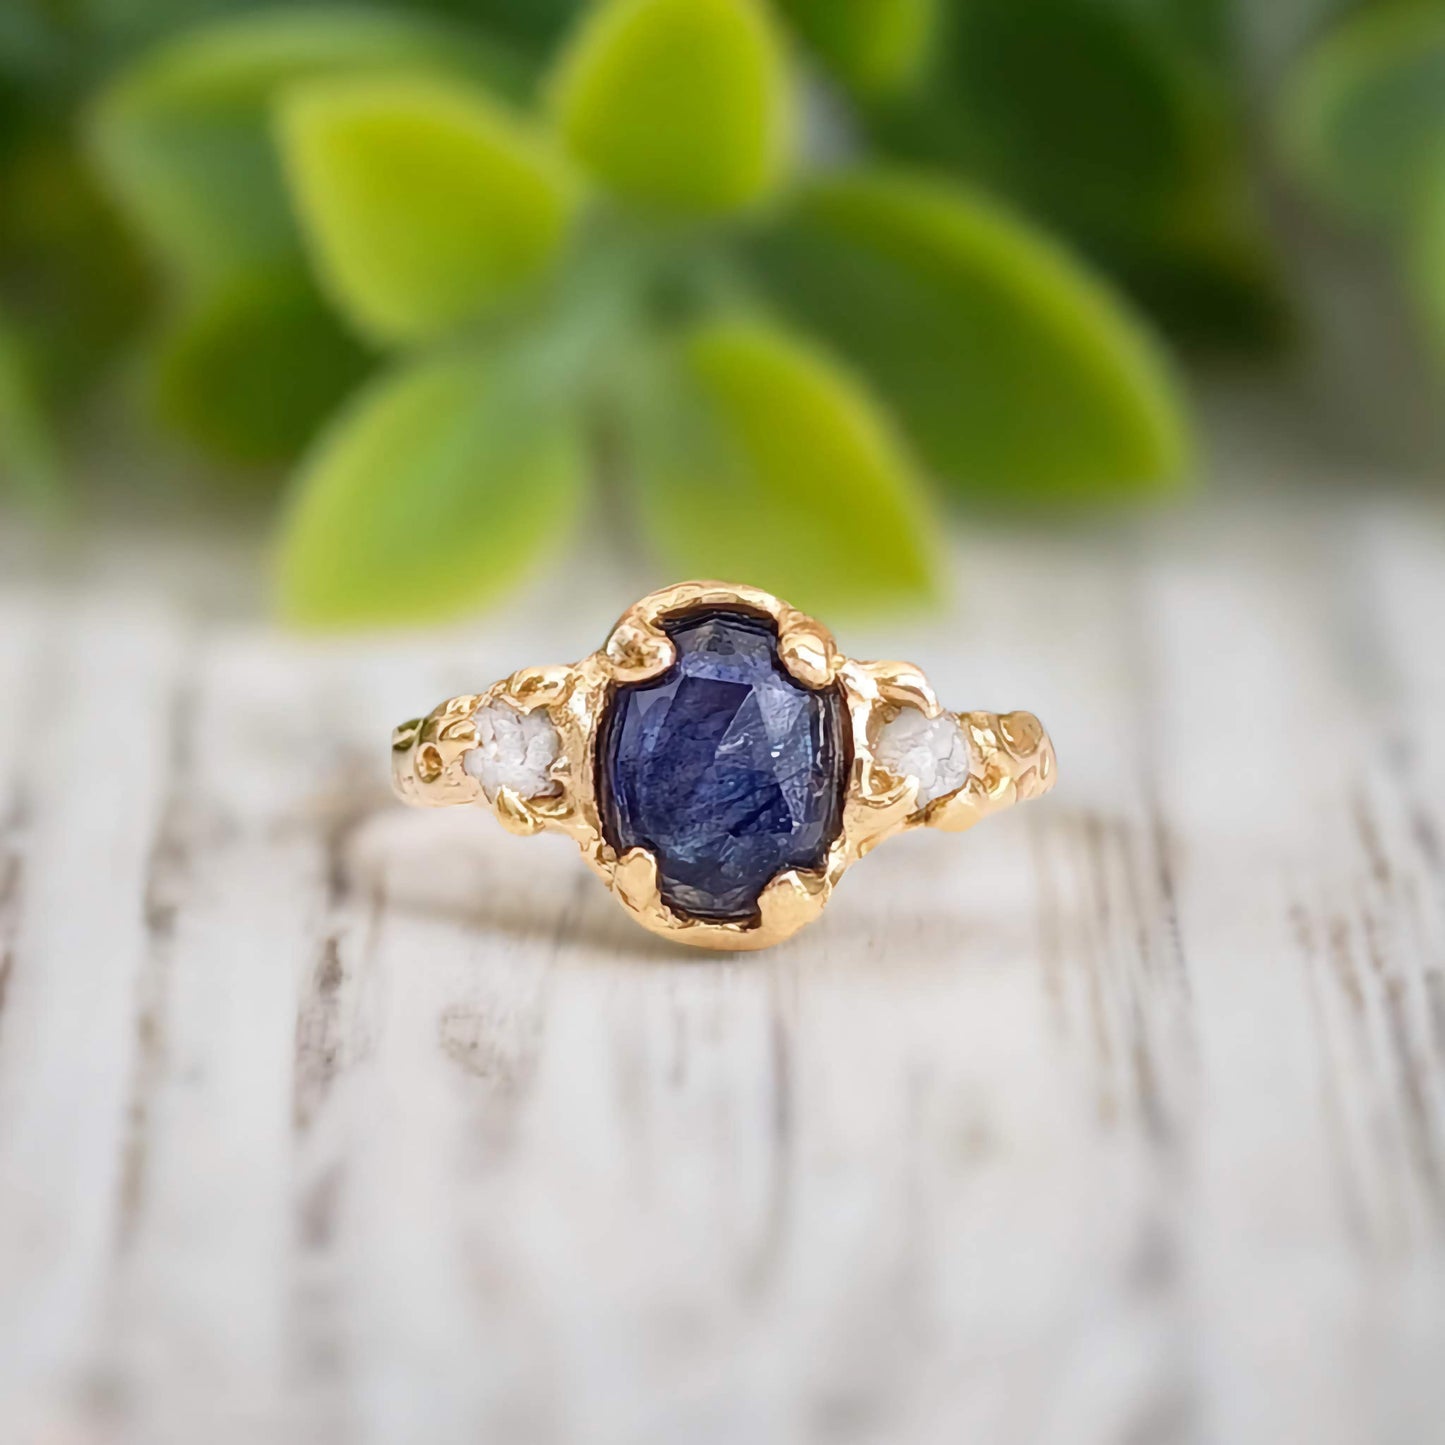 Blue Sapphire and diamond engagement ring - Solid 14k Gold textured ring